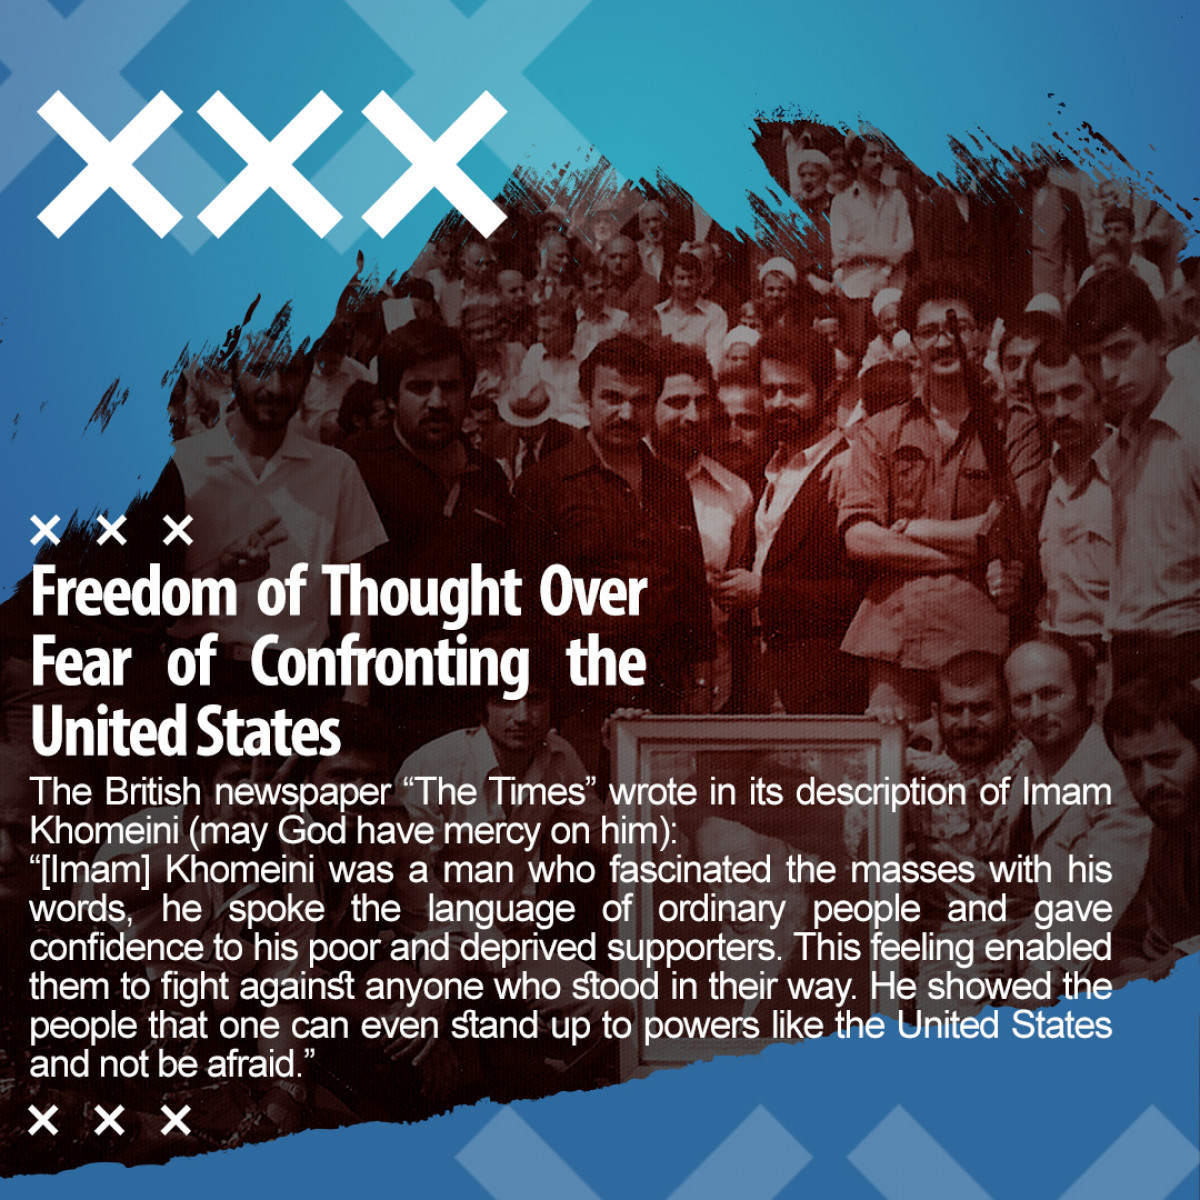 freedom of Thought over fear of confronting the United States